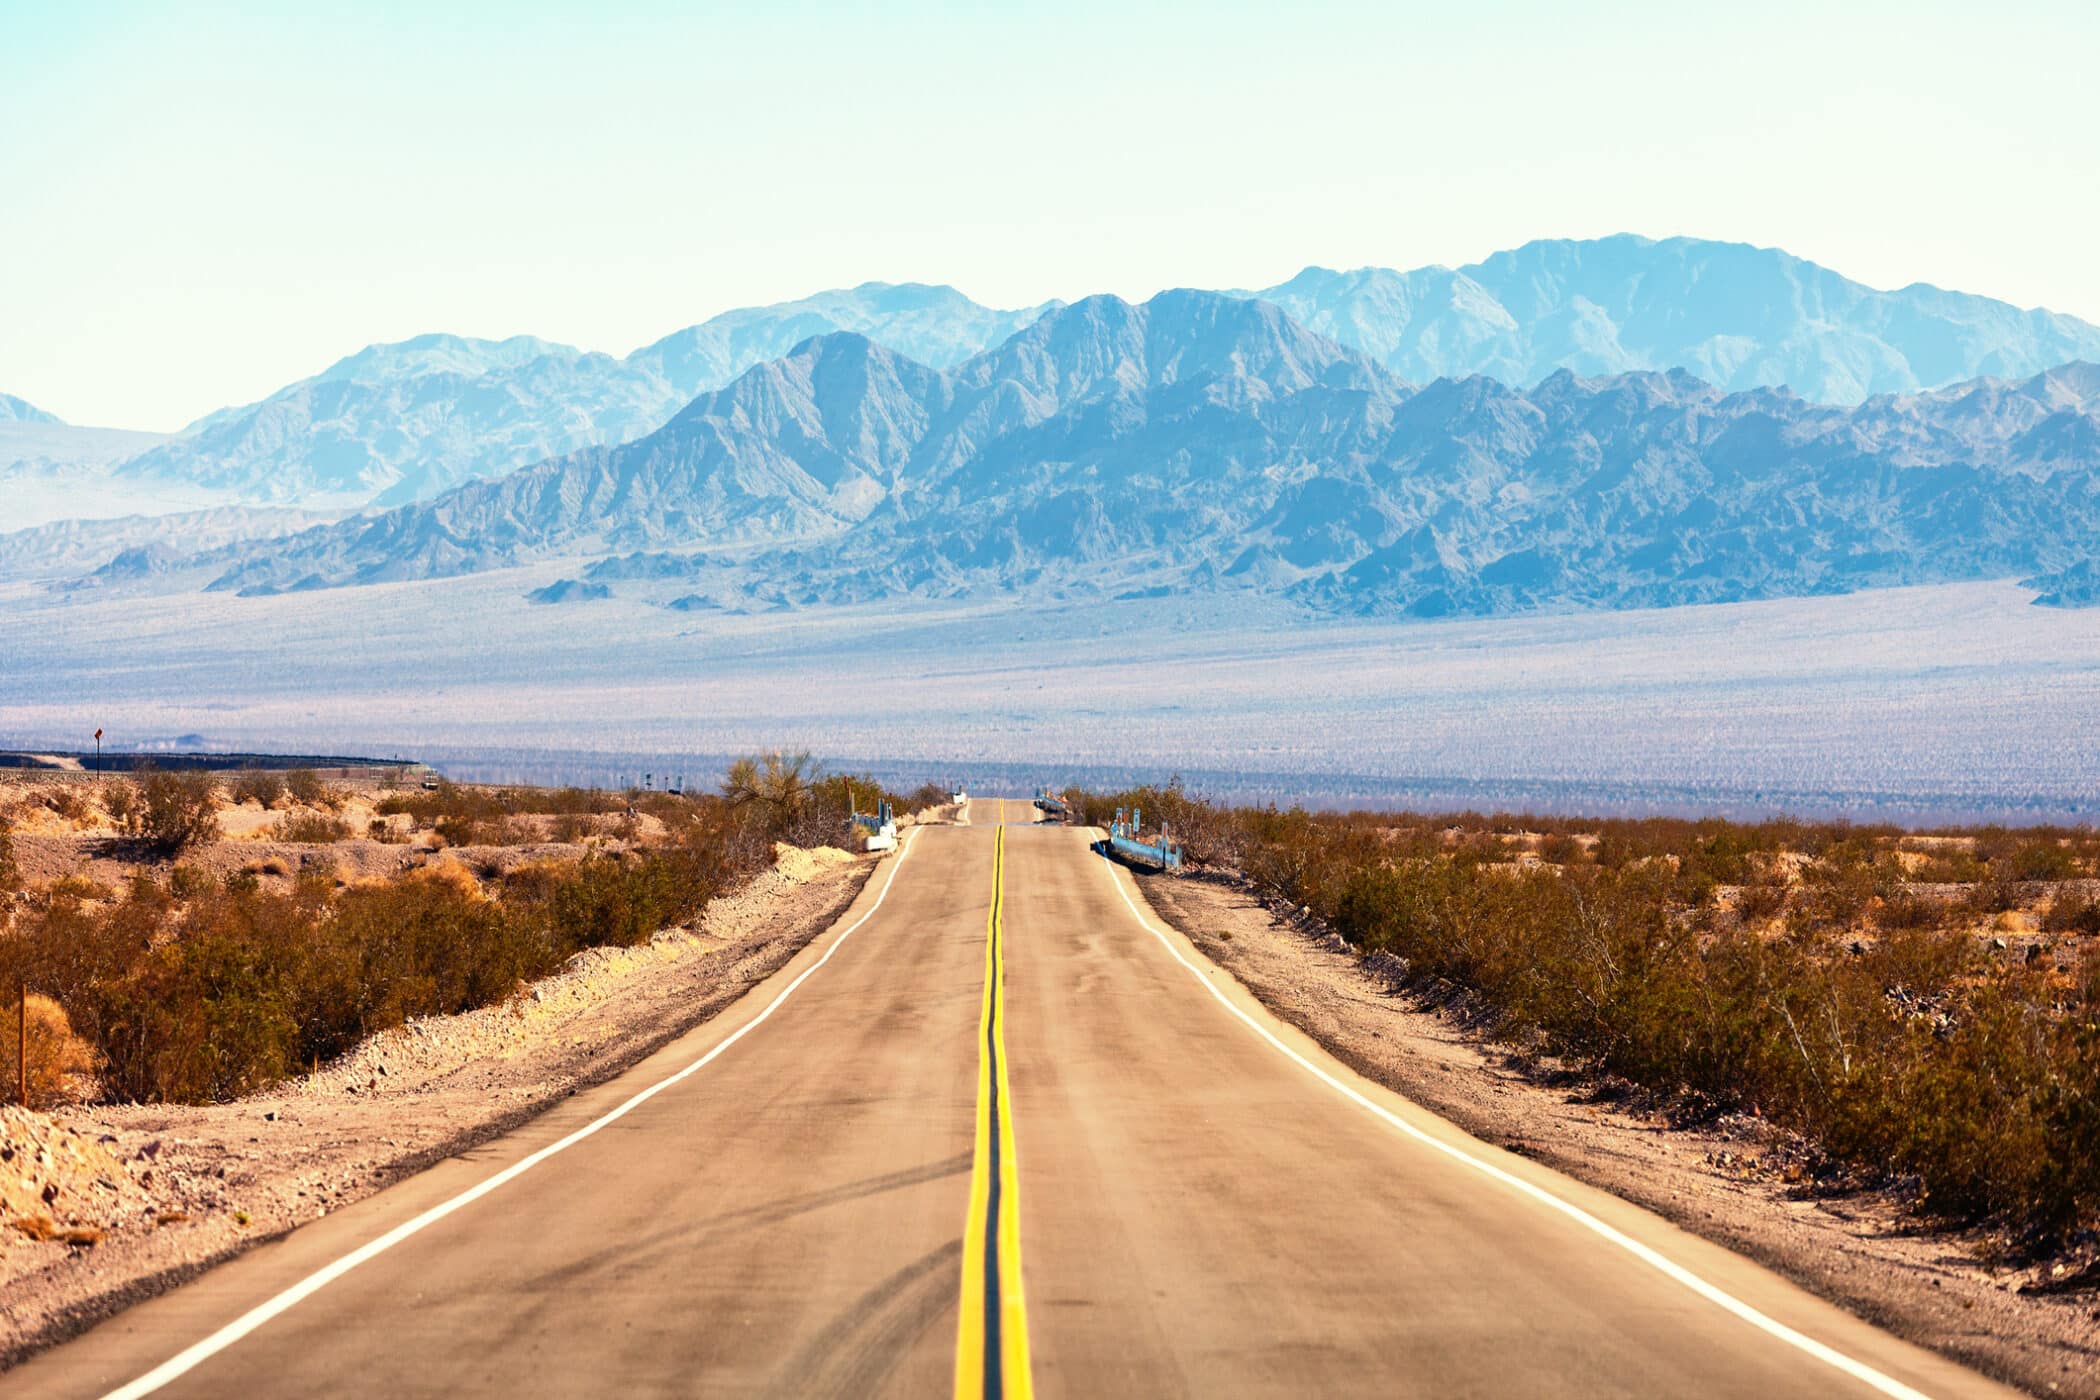 View from the Route 66, Mojave Desert, Southern California, United States